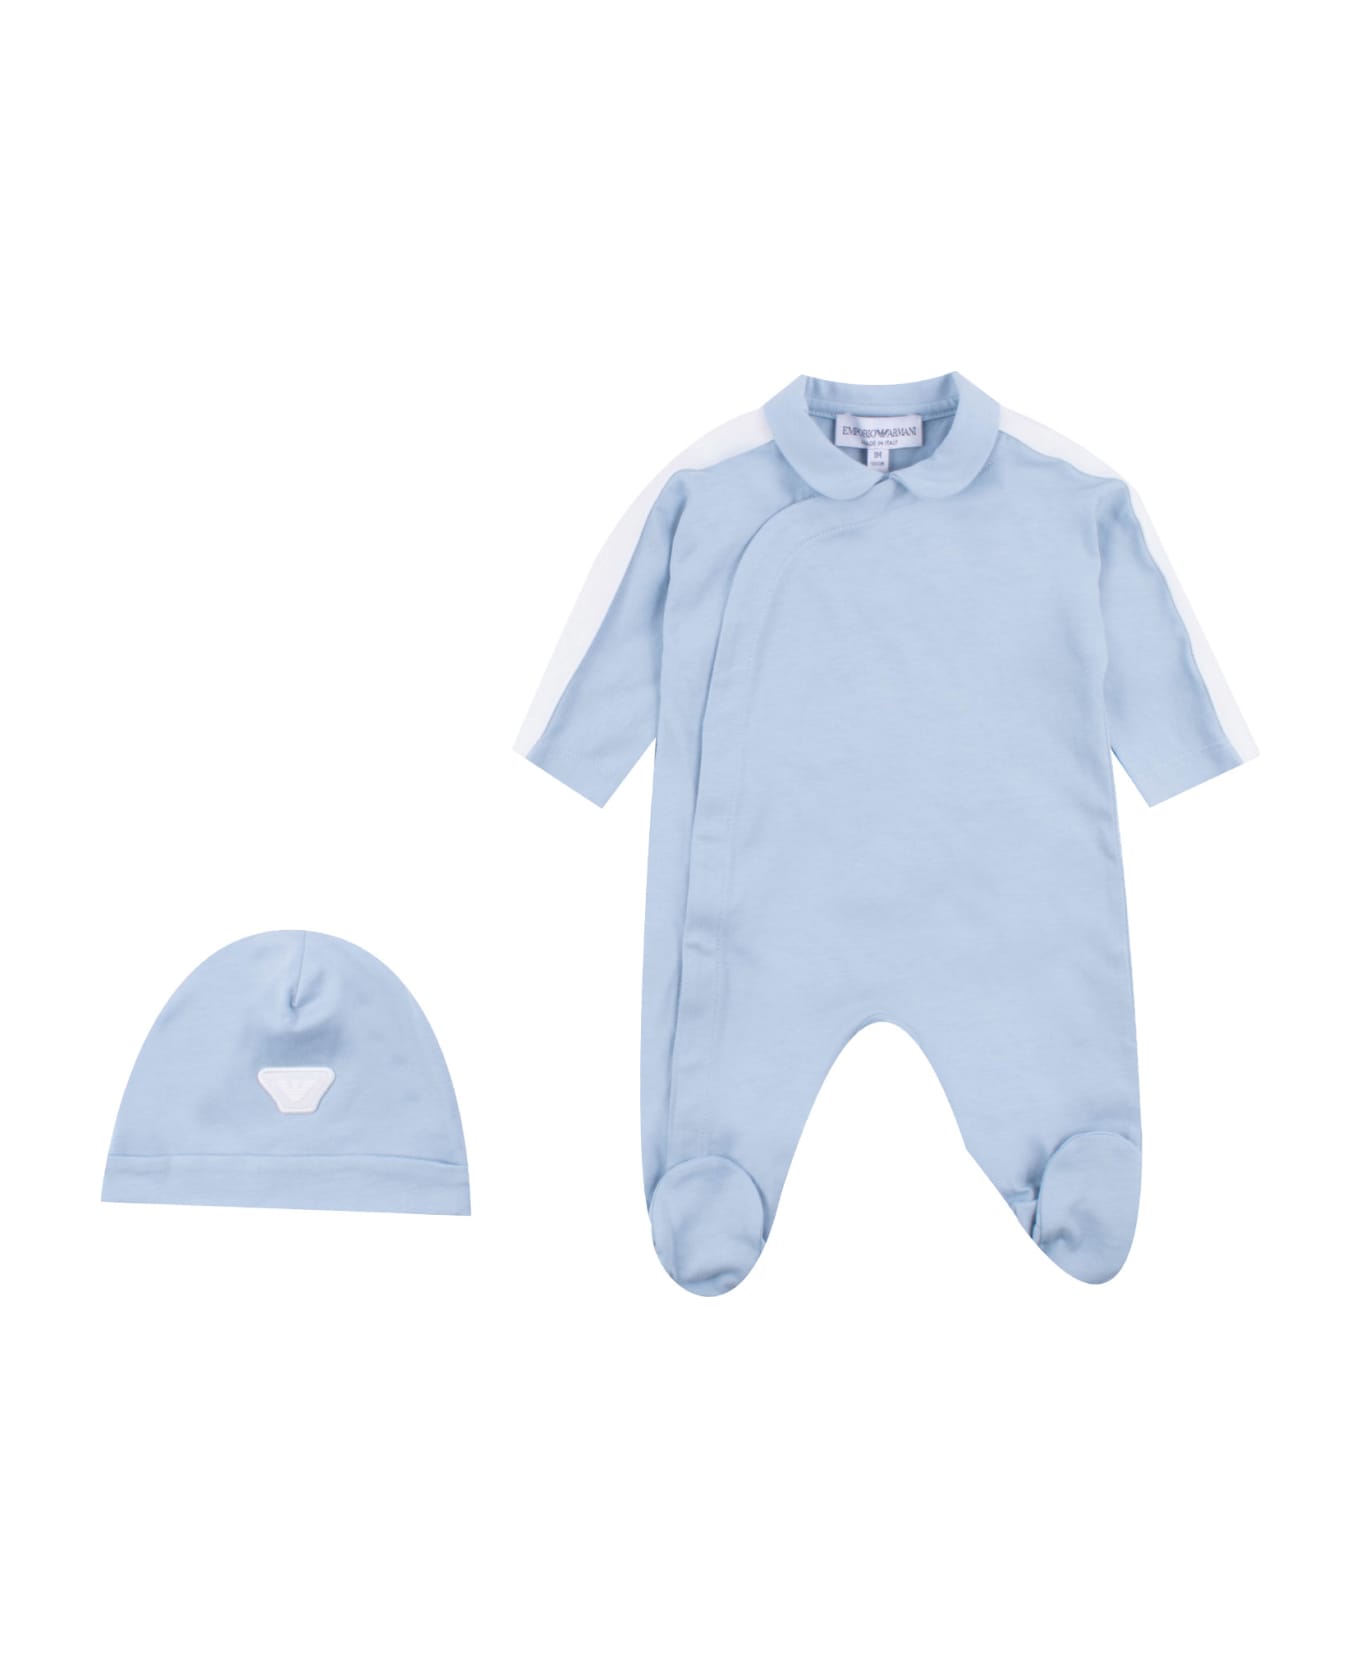 Emporio Armani Cotton Romper And Hat - Light blue アクセサリー＆ギフト